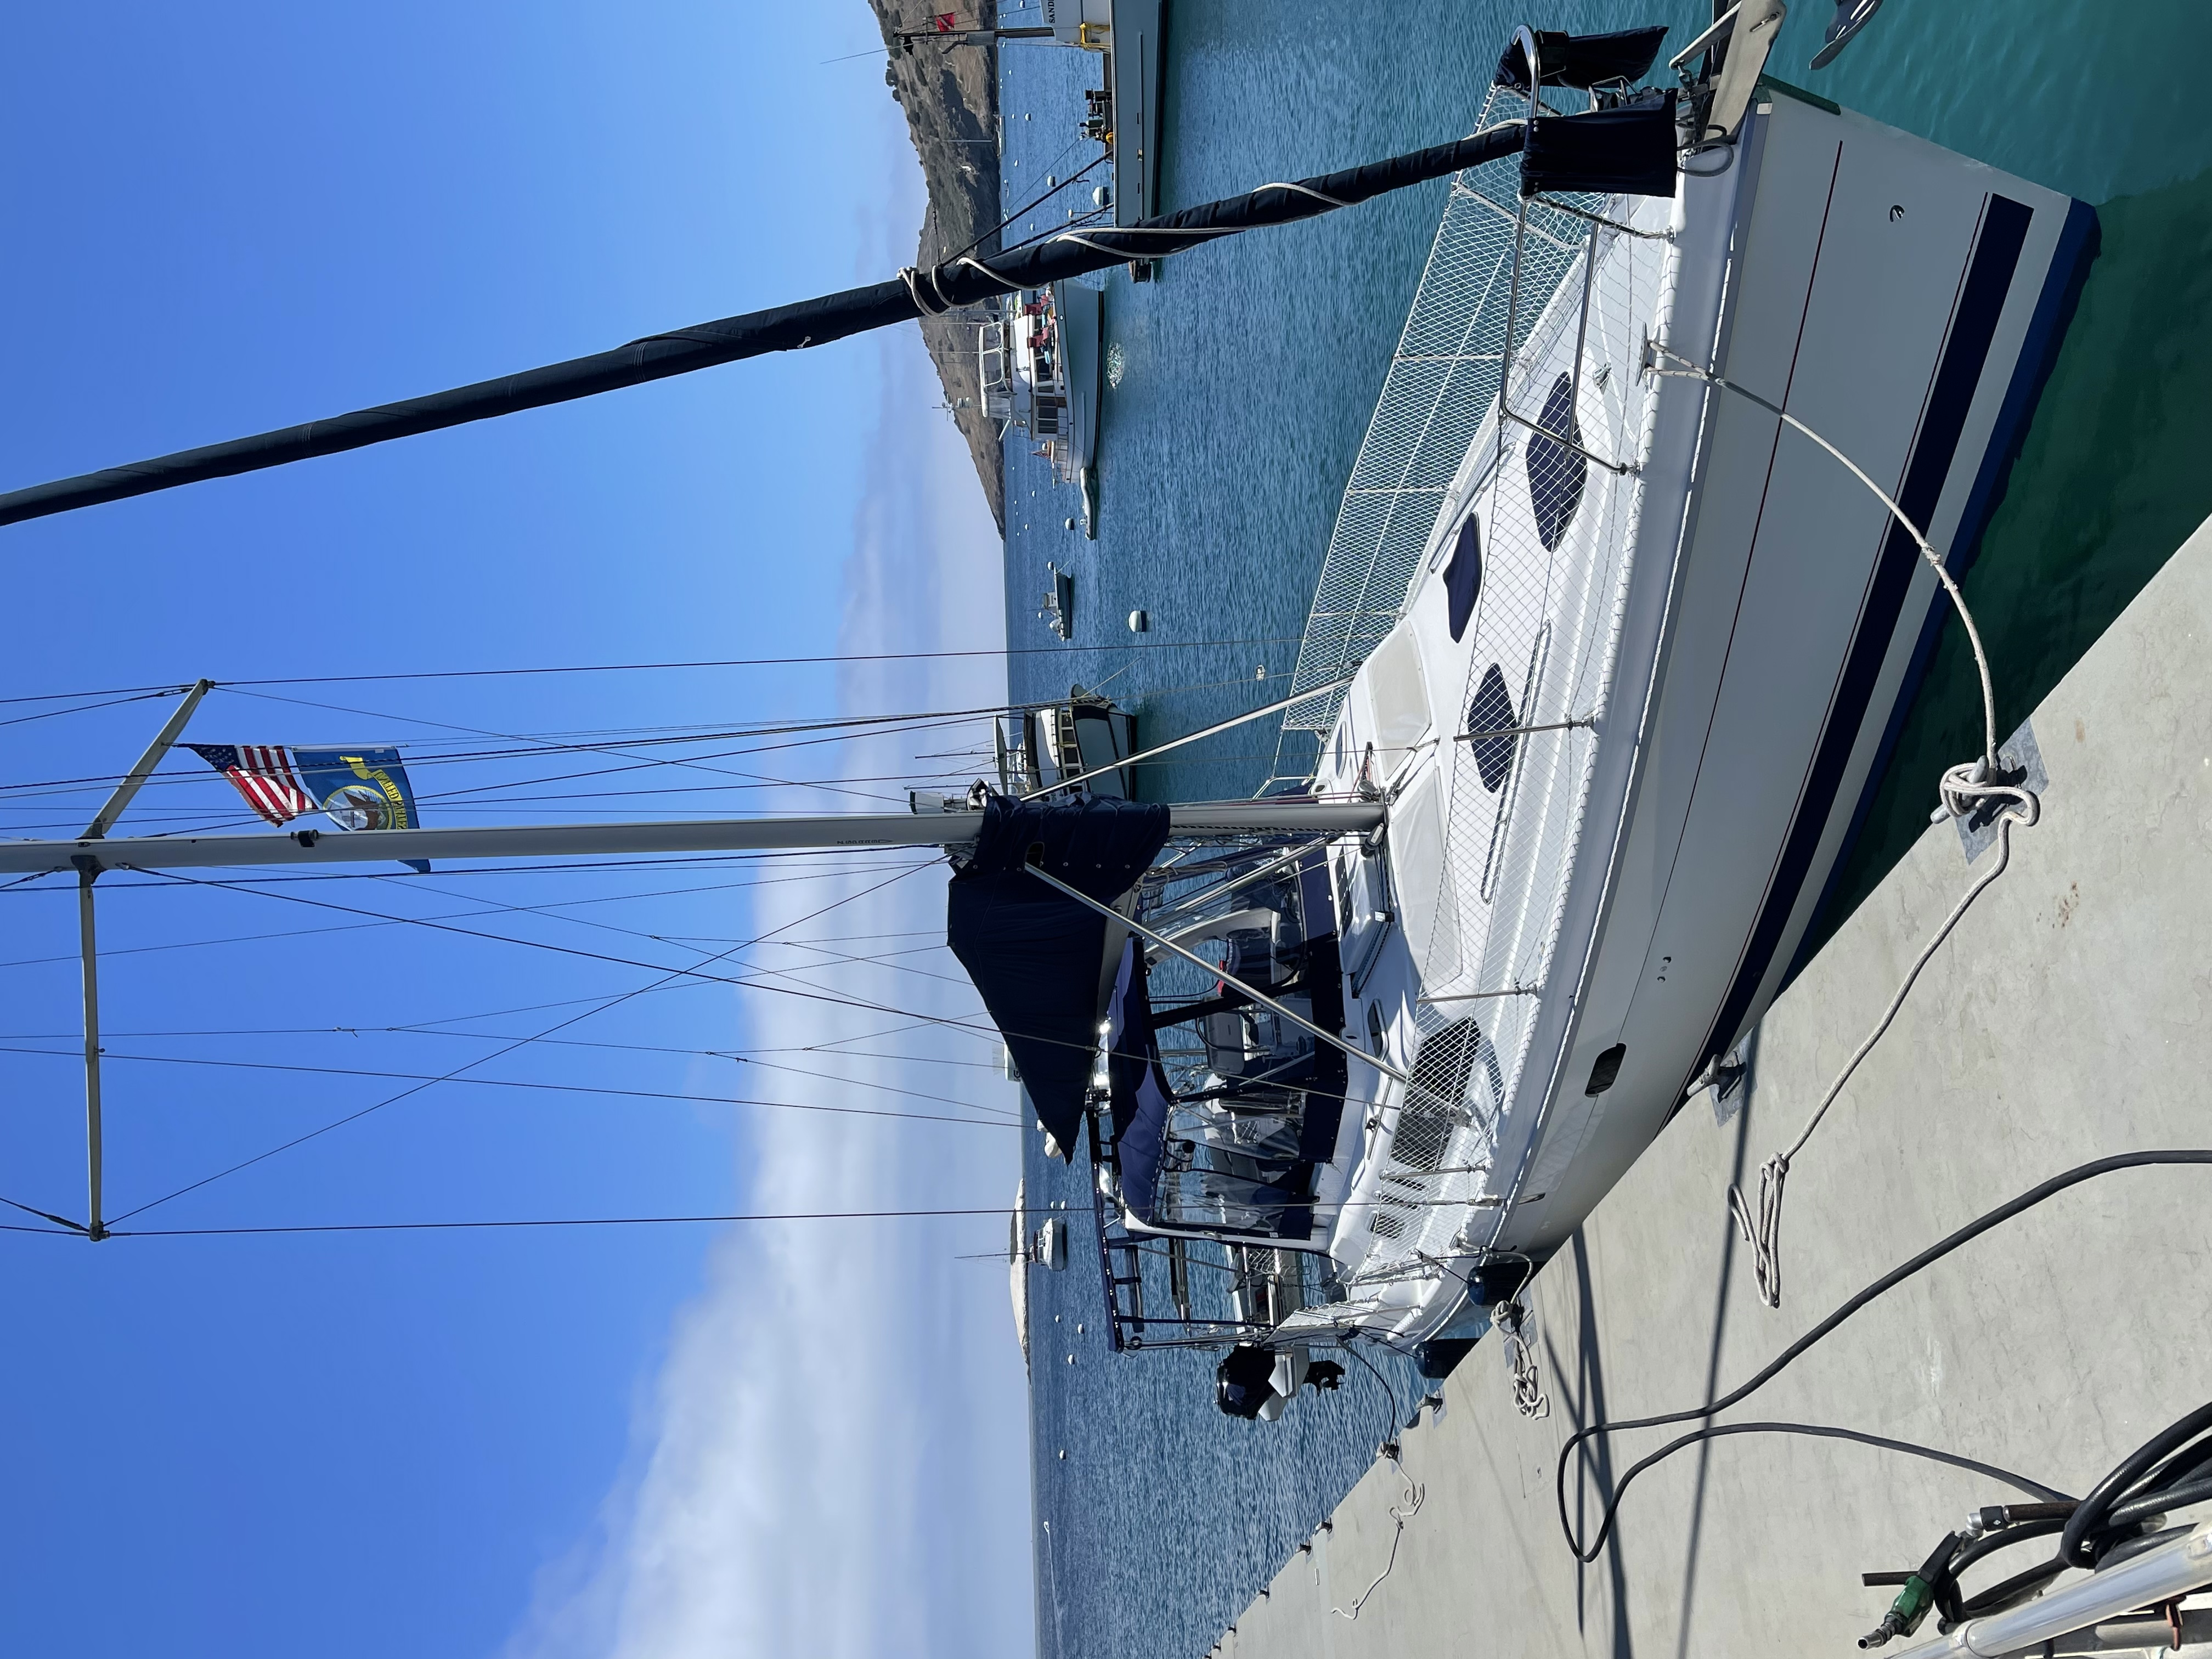 1998 Hunter Passage 450 Sailboat for sale in Long Beach, CA - image 1 